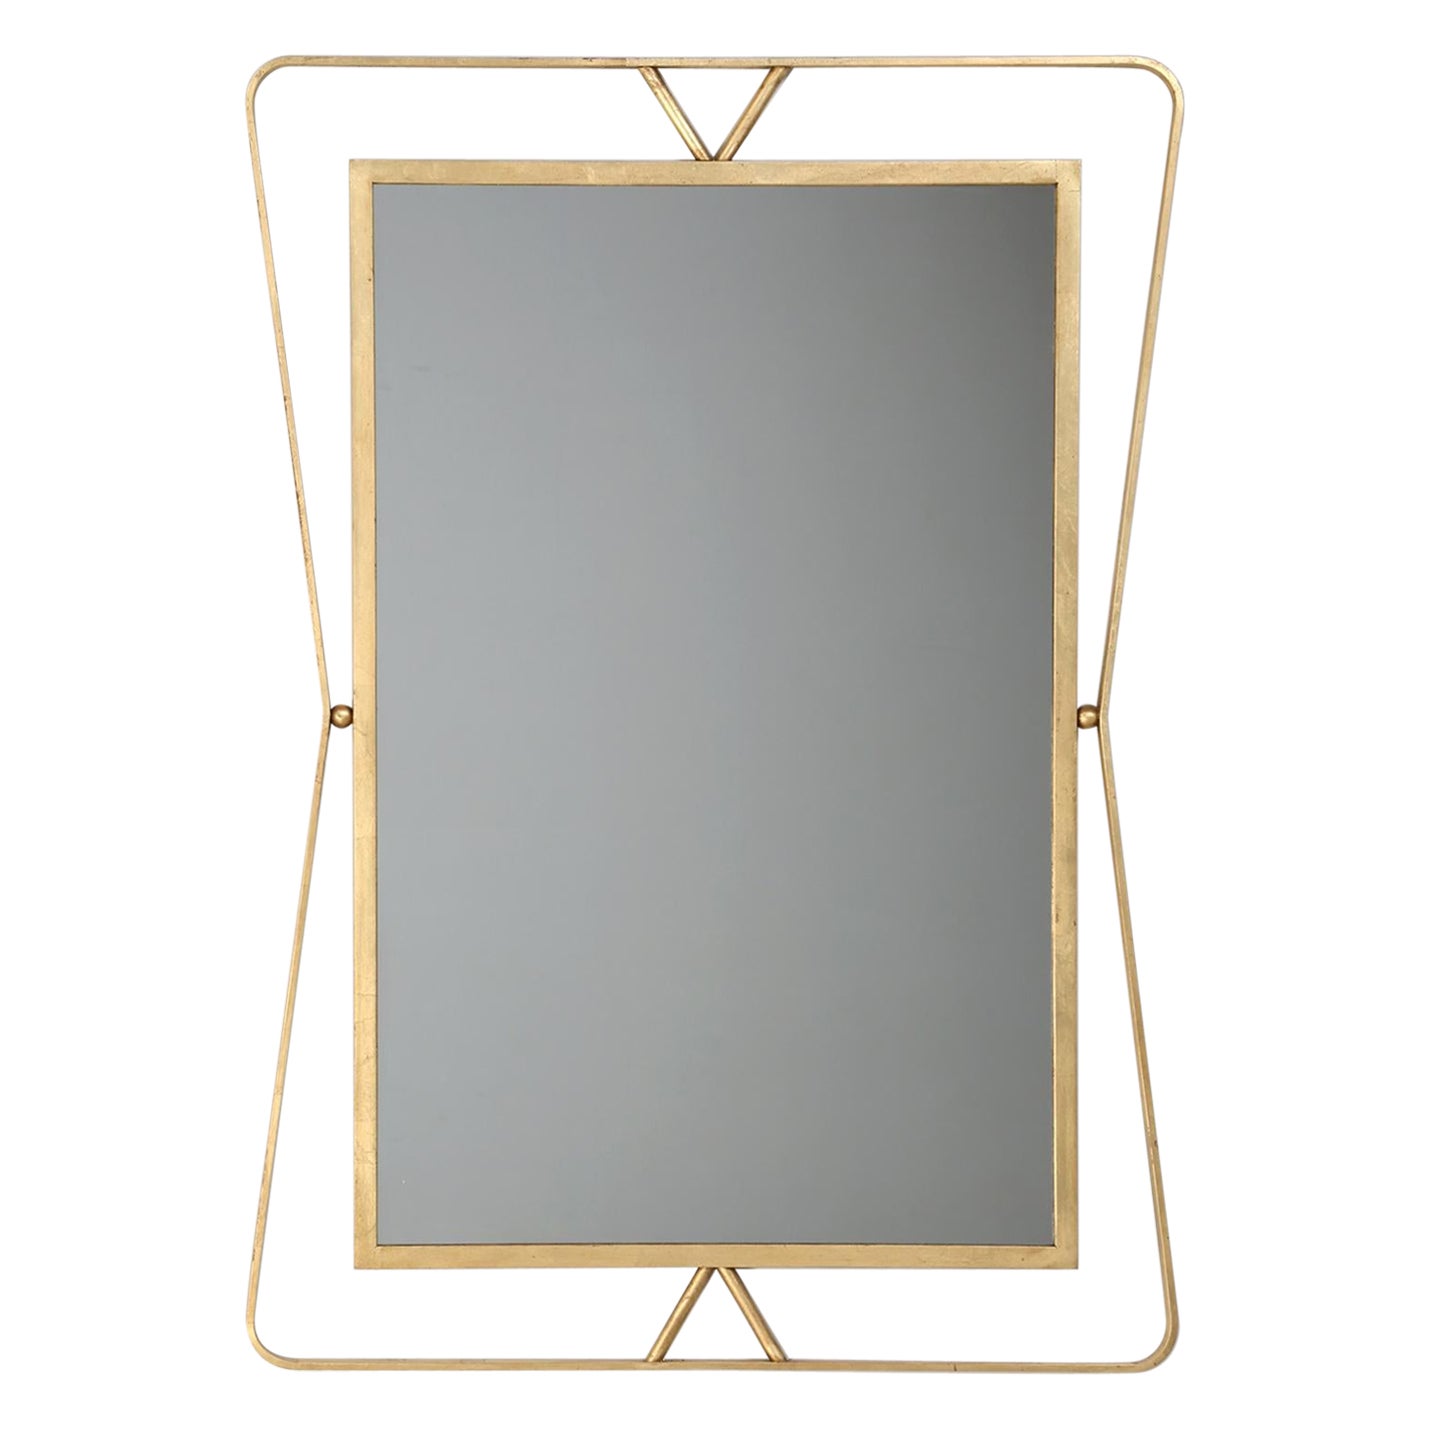 Custom Hand-Made by Old Plank Gilded Wall Mirror Erhältlich jede Dimension, Finish